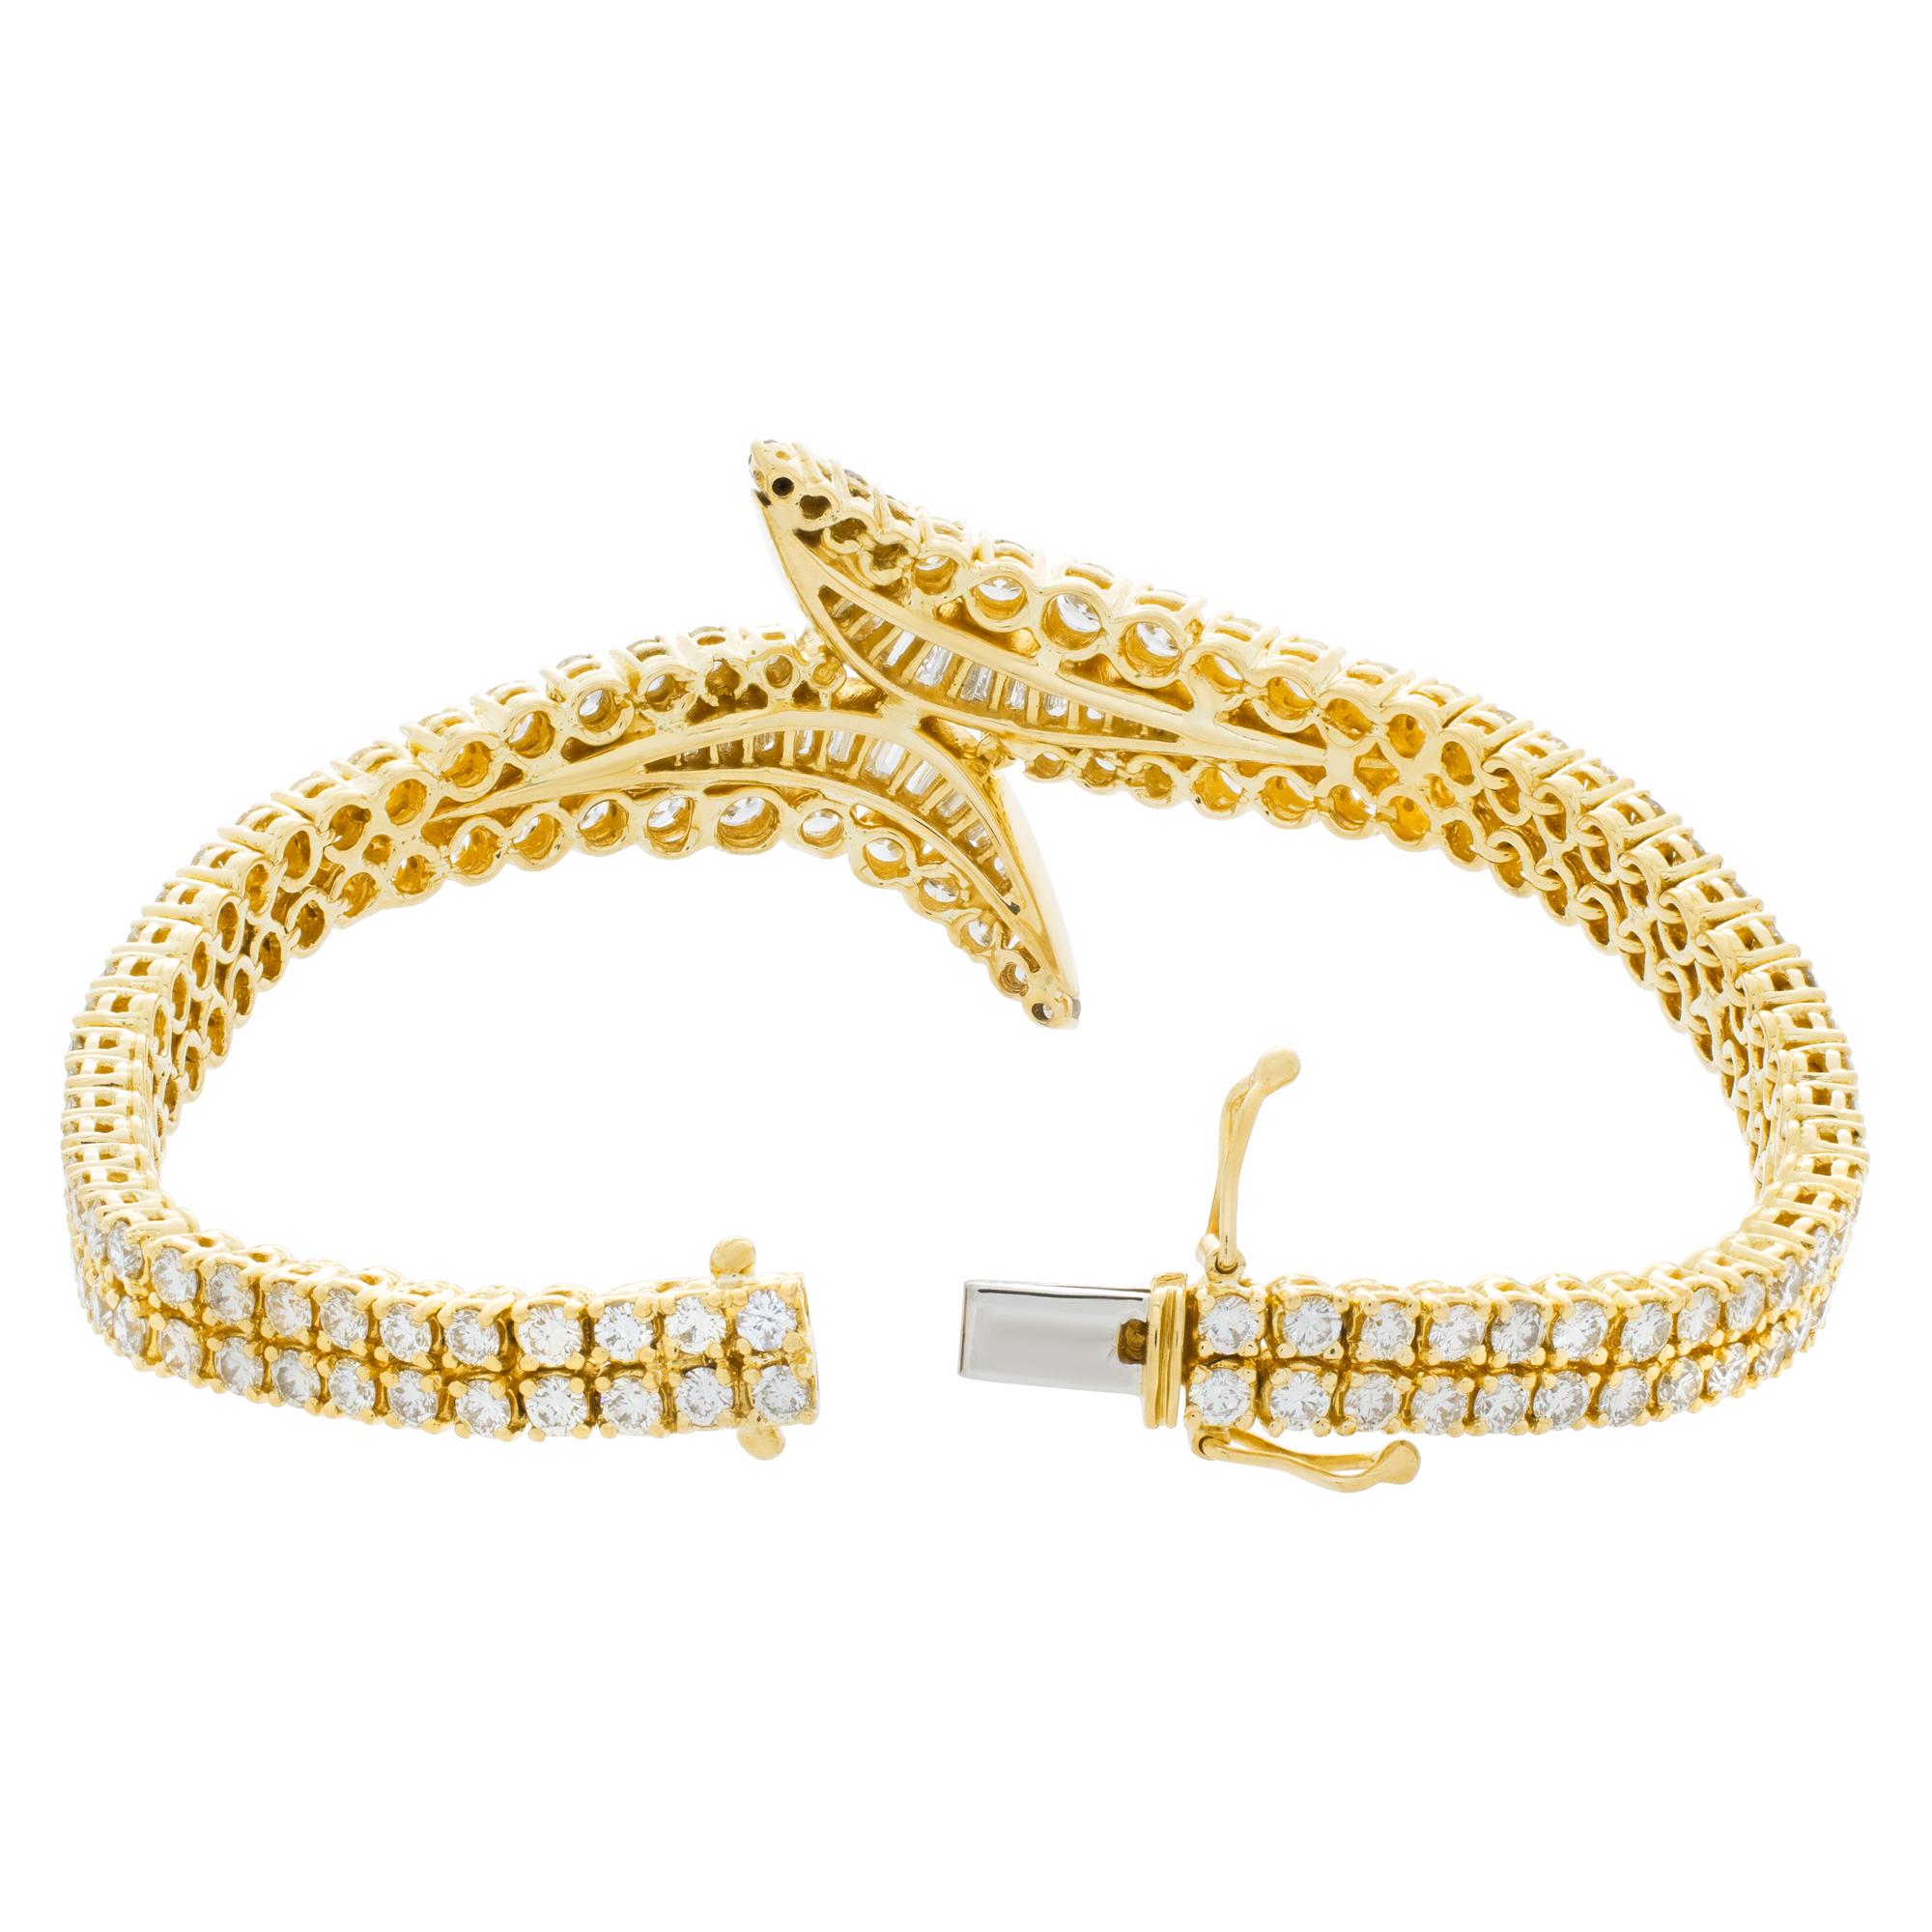 Breathtaking diamond bracelet in 18k yellow gold with over 9 carats in full cut round brilliant and baguette diamonds.
Stones are G-H color, VVS-VS clarity.
Length 7 inches